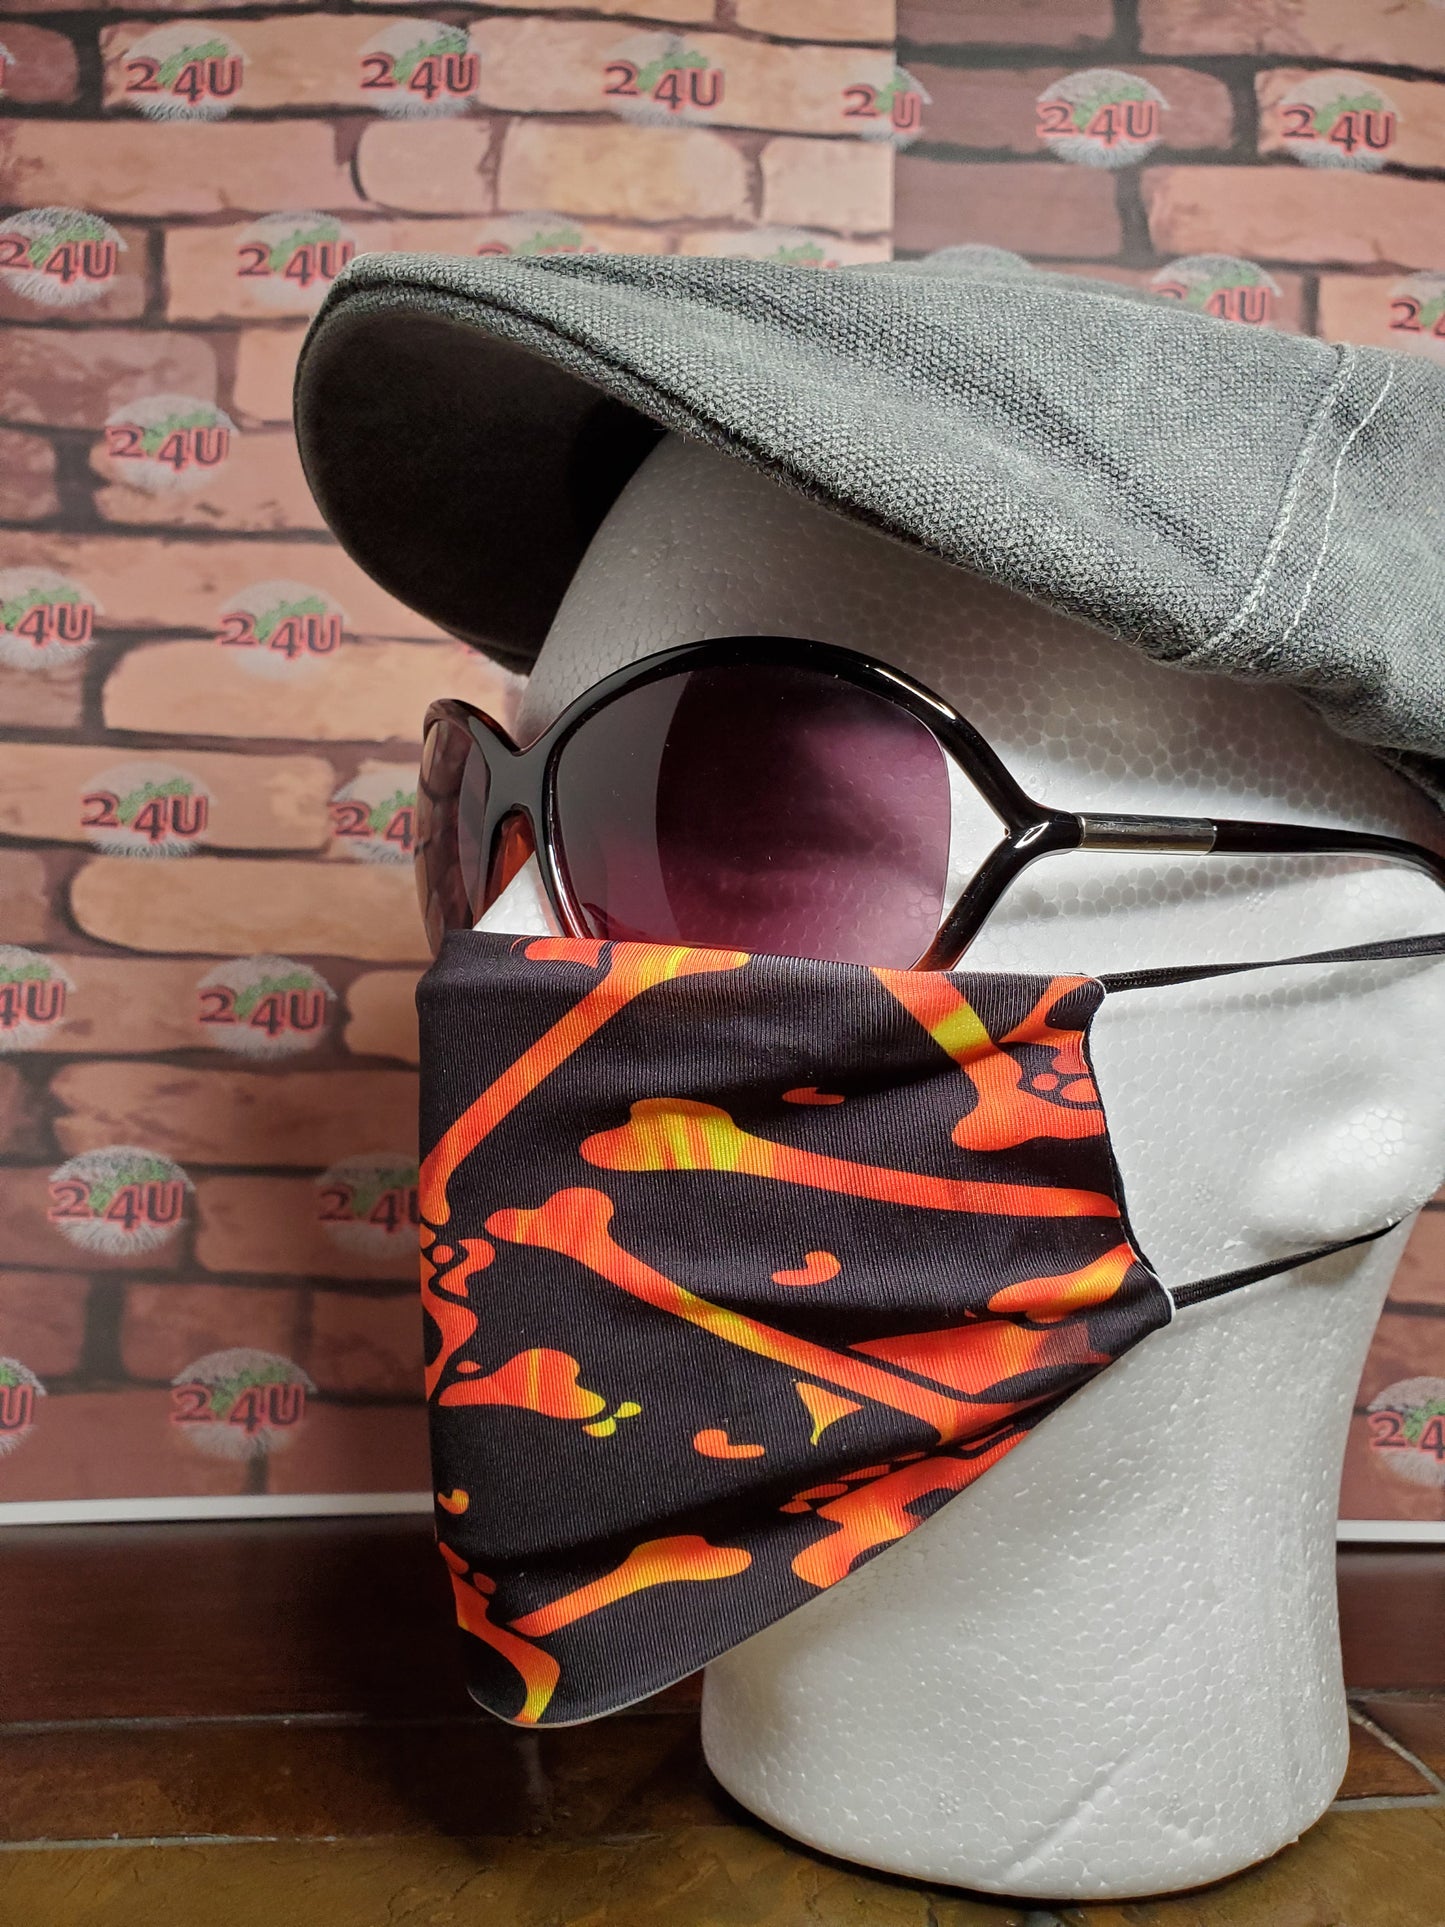 Fire Skull Face Cover, Carbon Filter, Adjustable Ear Clips, 2 Layer Mask, Breathable & Washable, Personalized Available, Coffee Mug Option